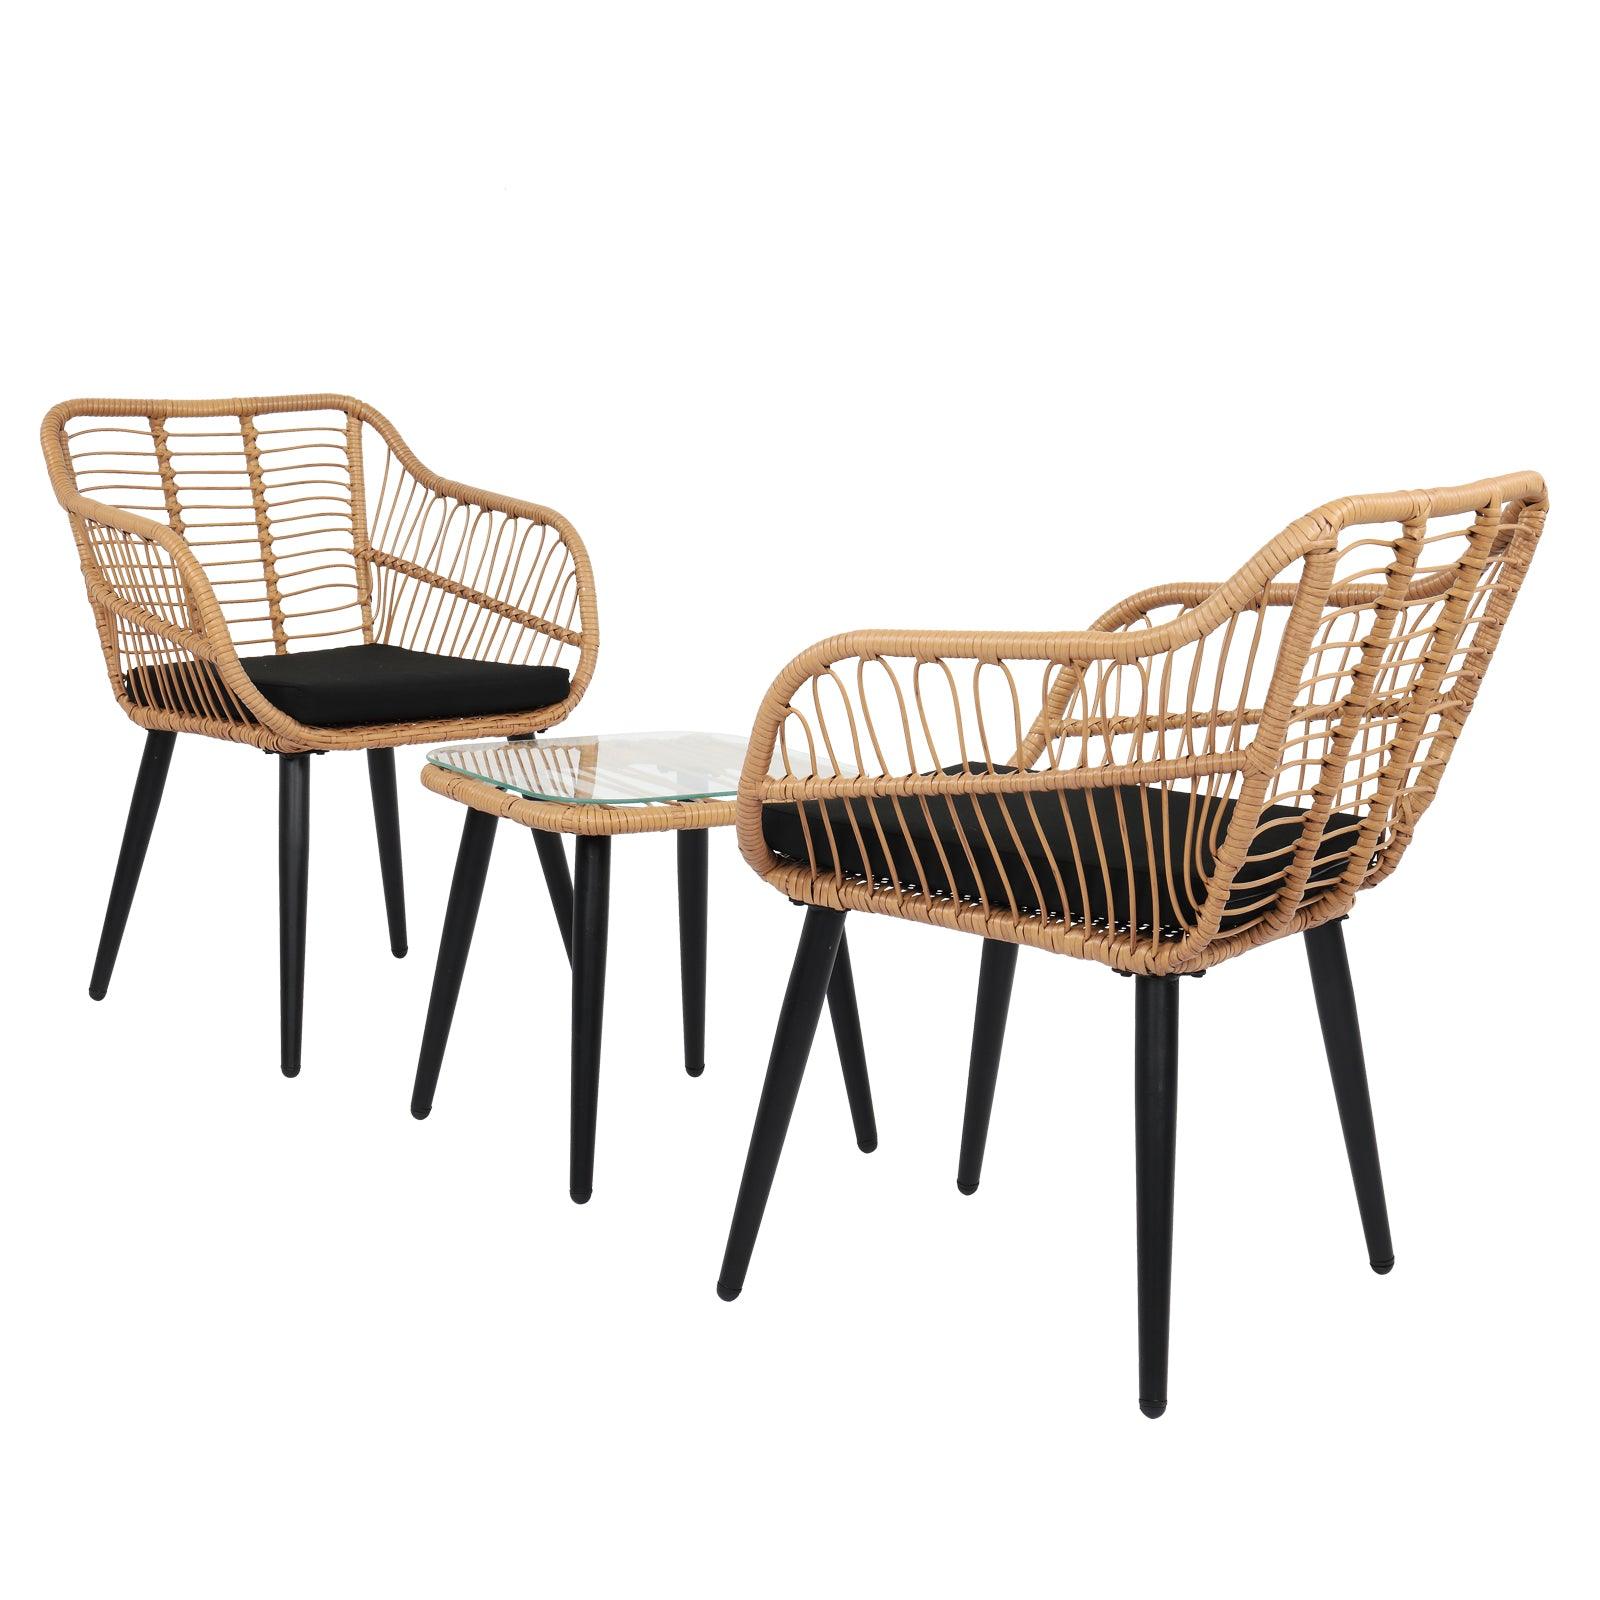 3 Piece Patio Wicker Chair Set with Glass Top Table and Soft Cushion, Outdoor Backyard Porch Furniture - Charming Spaces